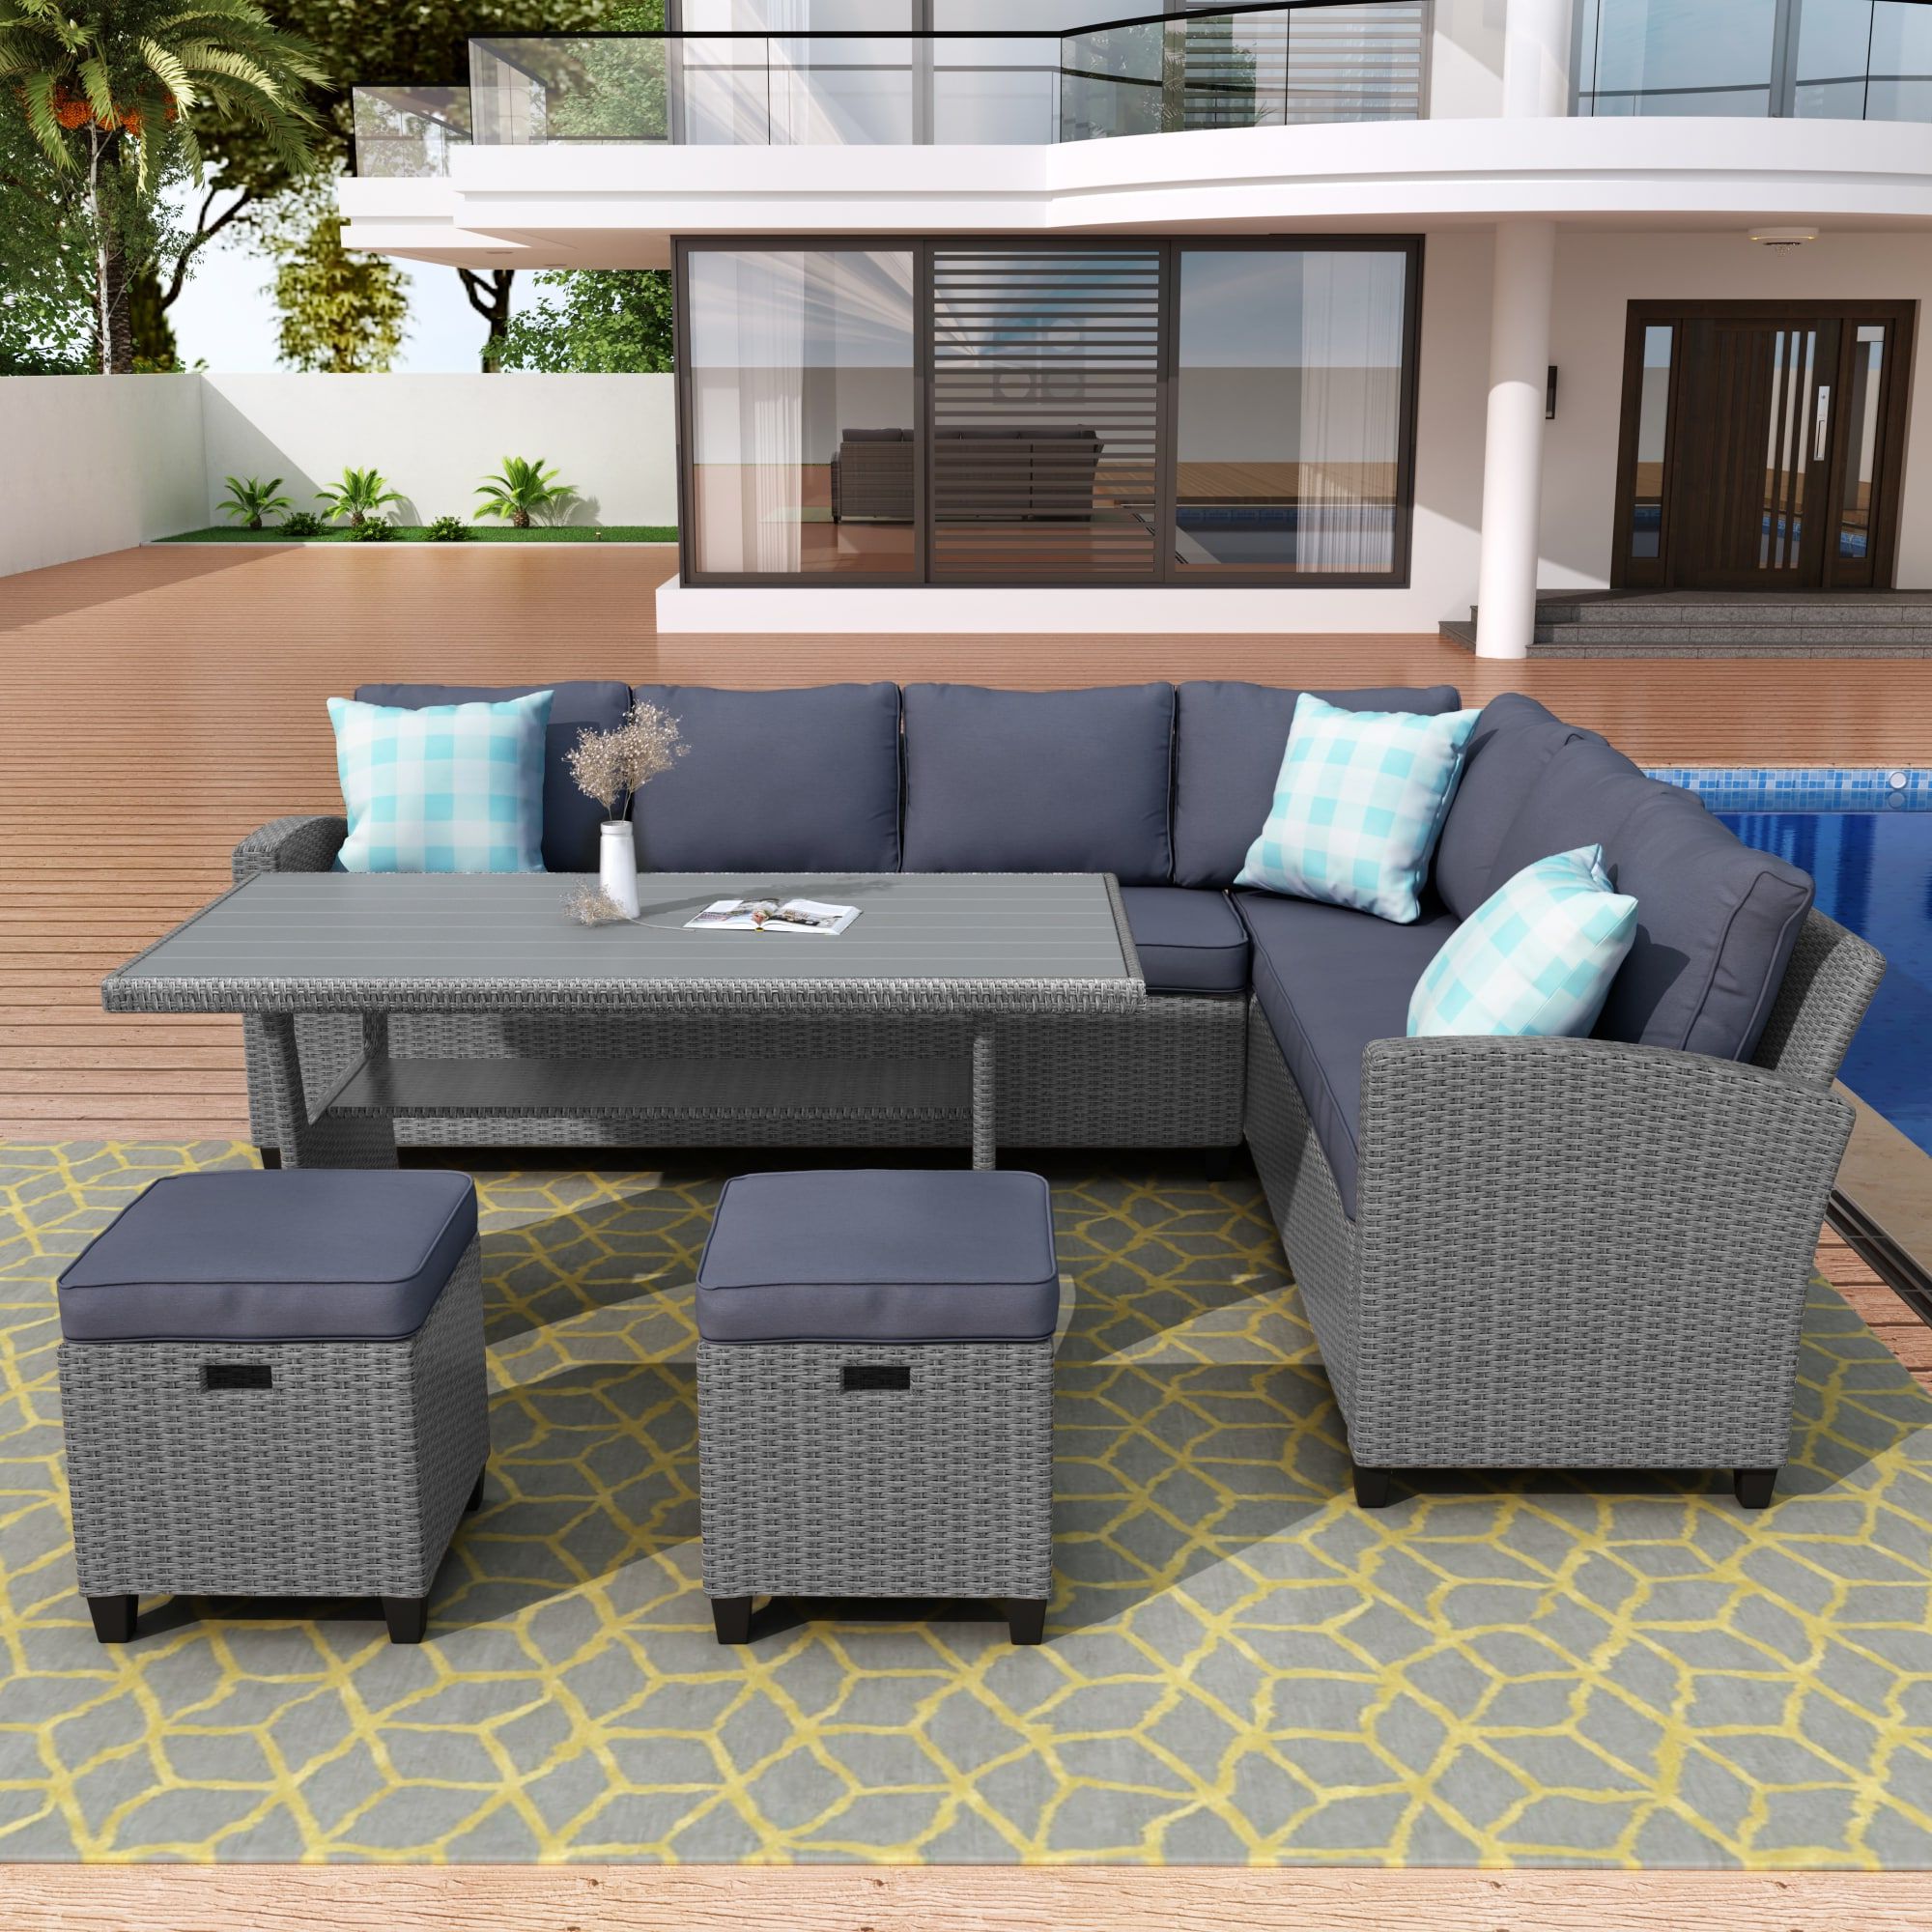 5 Piece Patio Conversation Set For Preferred Clihome 5 Piece Patio Conversation Set 5 Piece Rattan Patio Conversation Set  With Gray Cushions In The Patio Conversation Sets Department At Lowes (View 4 of 16)